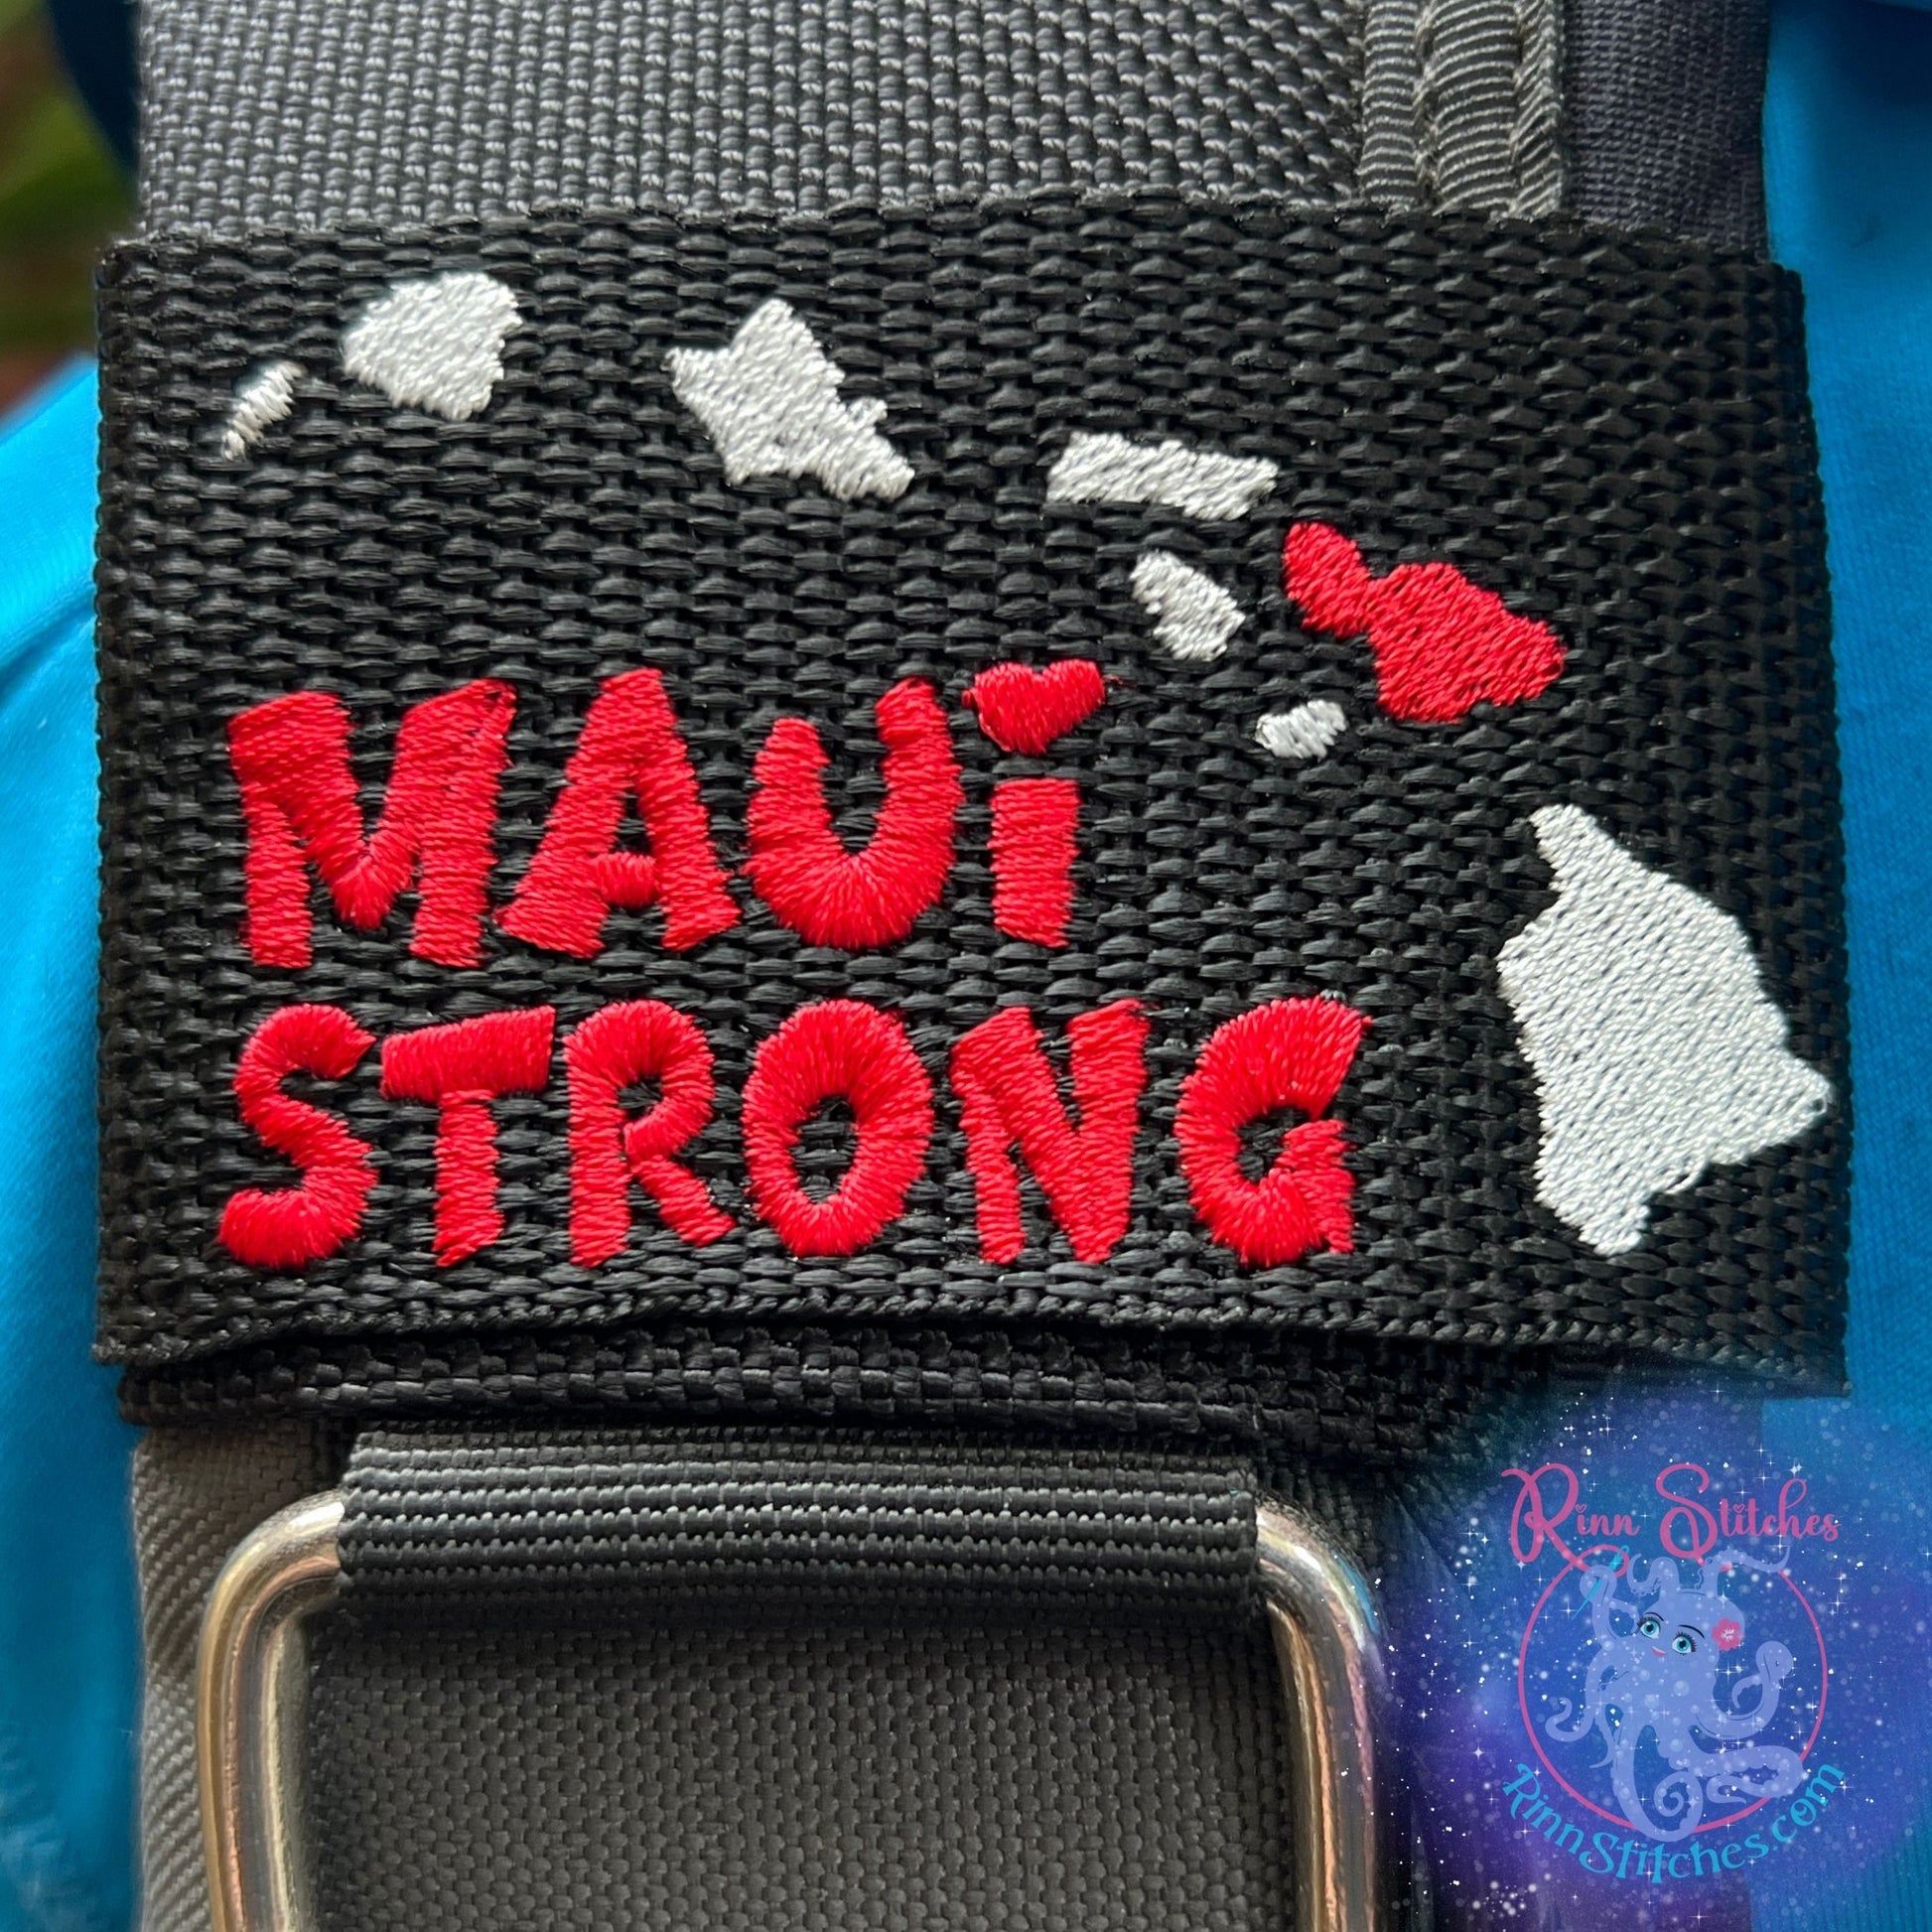 Maui Strong Embroidered BCD Tag - By Rinn Stitches Maui, Hawaii